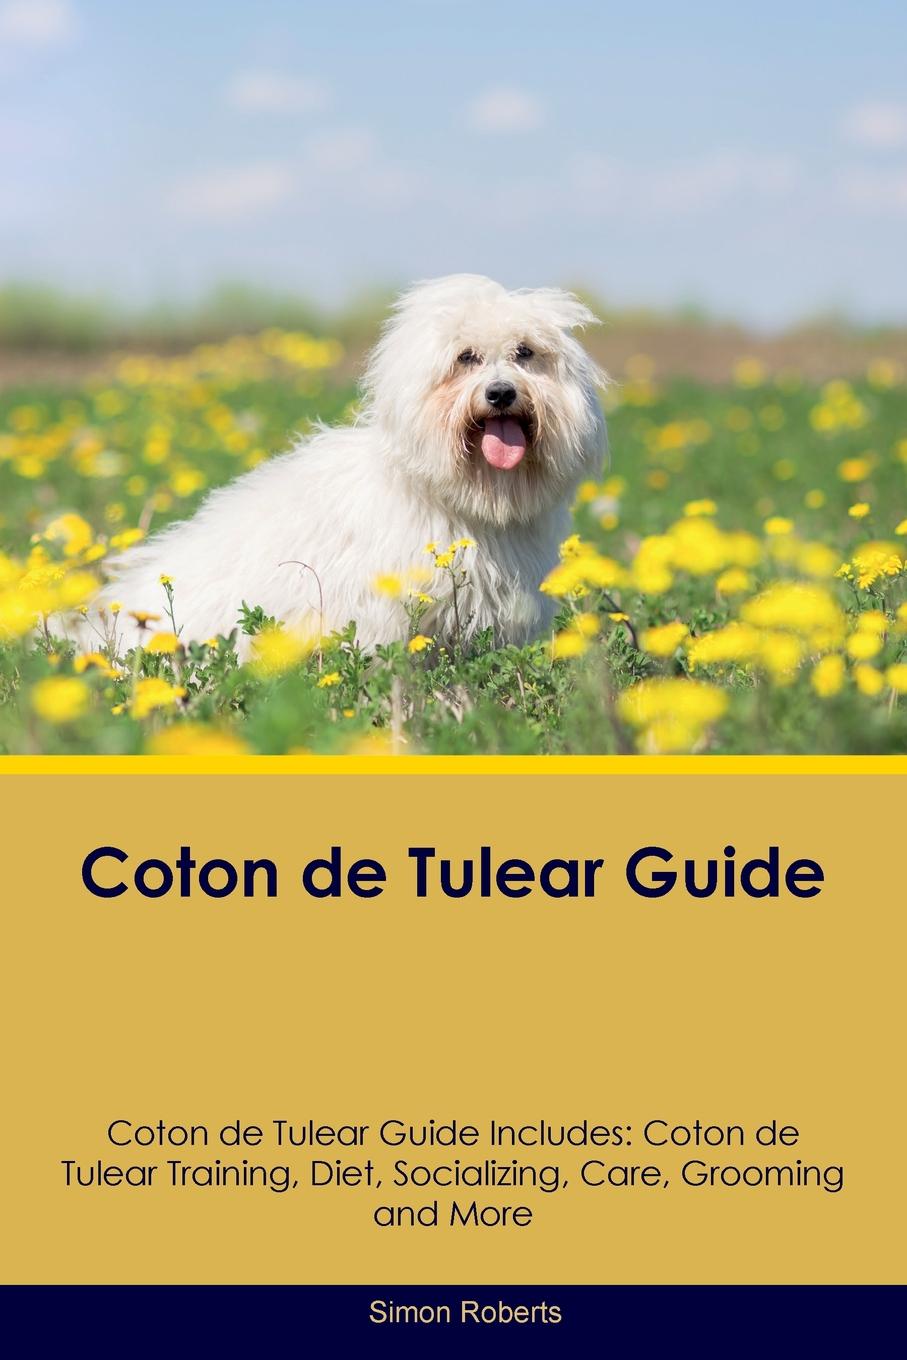 Coton de Tulear Guide Coton de Tulear Guide Includes. Coton de Tulear Training, Diet, Socializing, Care, Grooming, Breeding and More